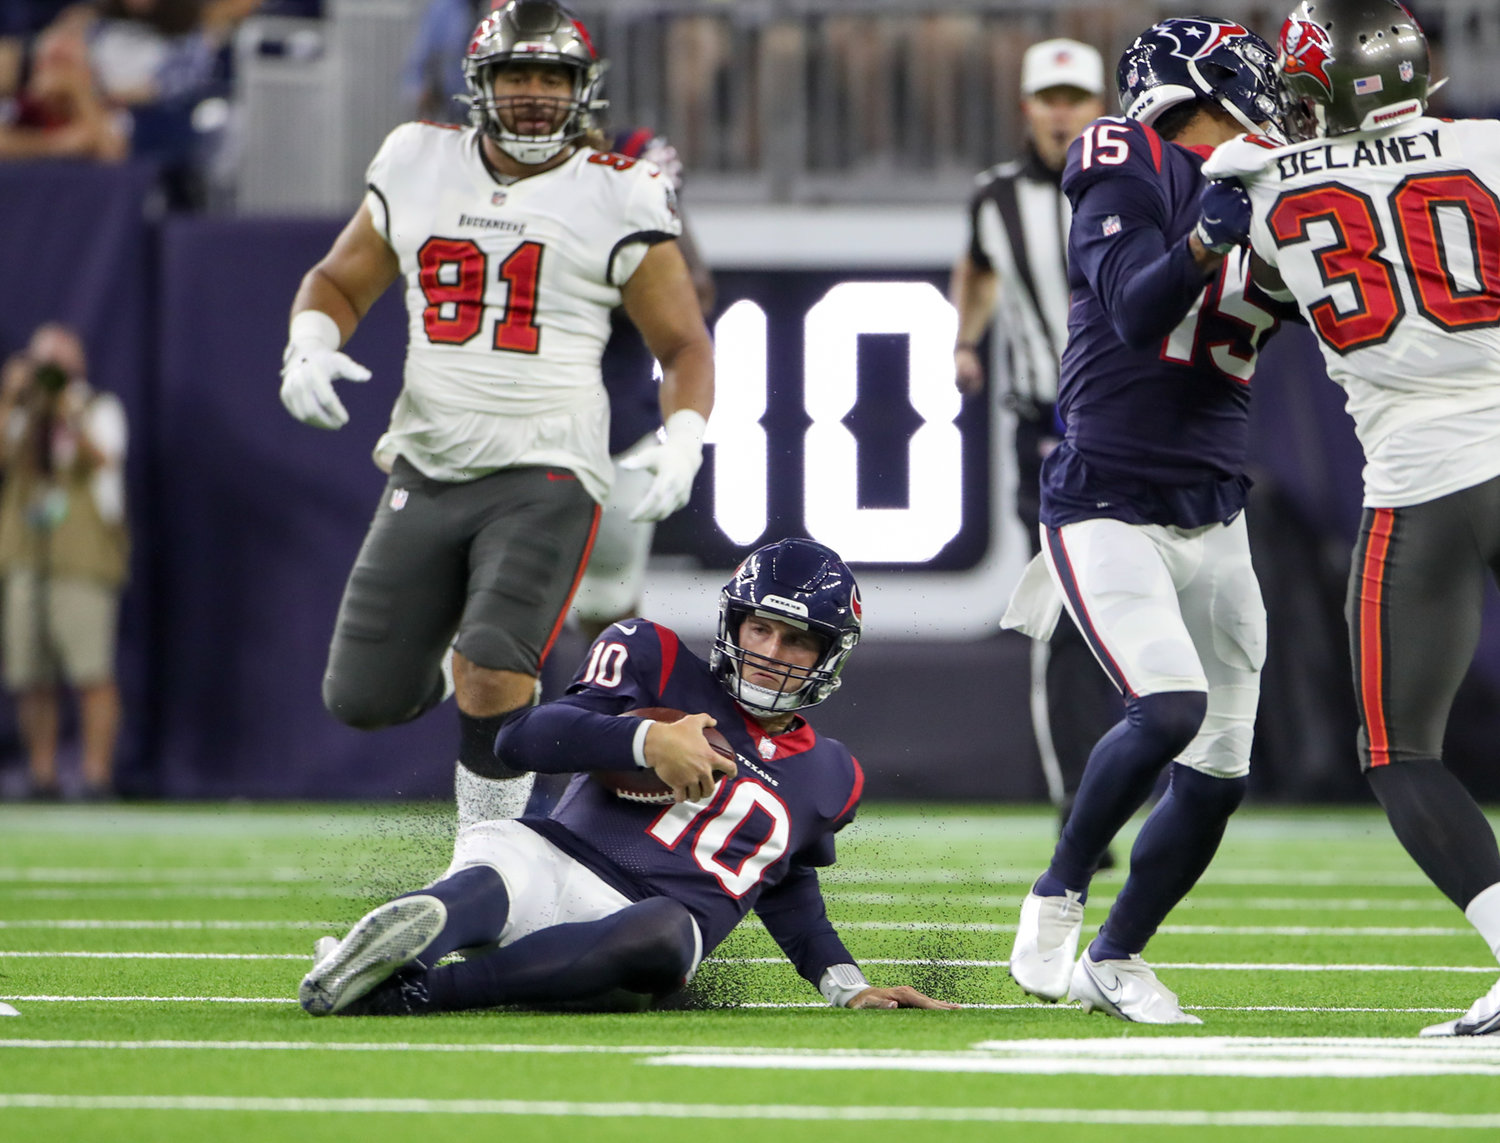 Houston Texans quarterback Davis Mills (10) slides after a 15-yard scramble during an NFL preseason game between the Houston Texans and the Tampa Bay Buccaneers on August 28, 2021 in Houston, Texas.